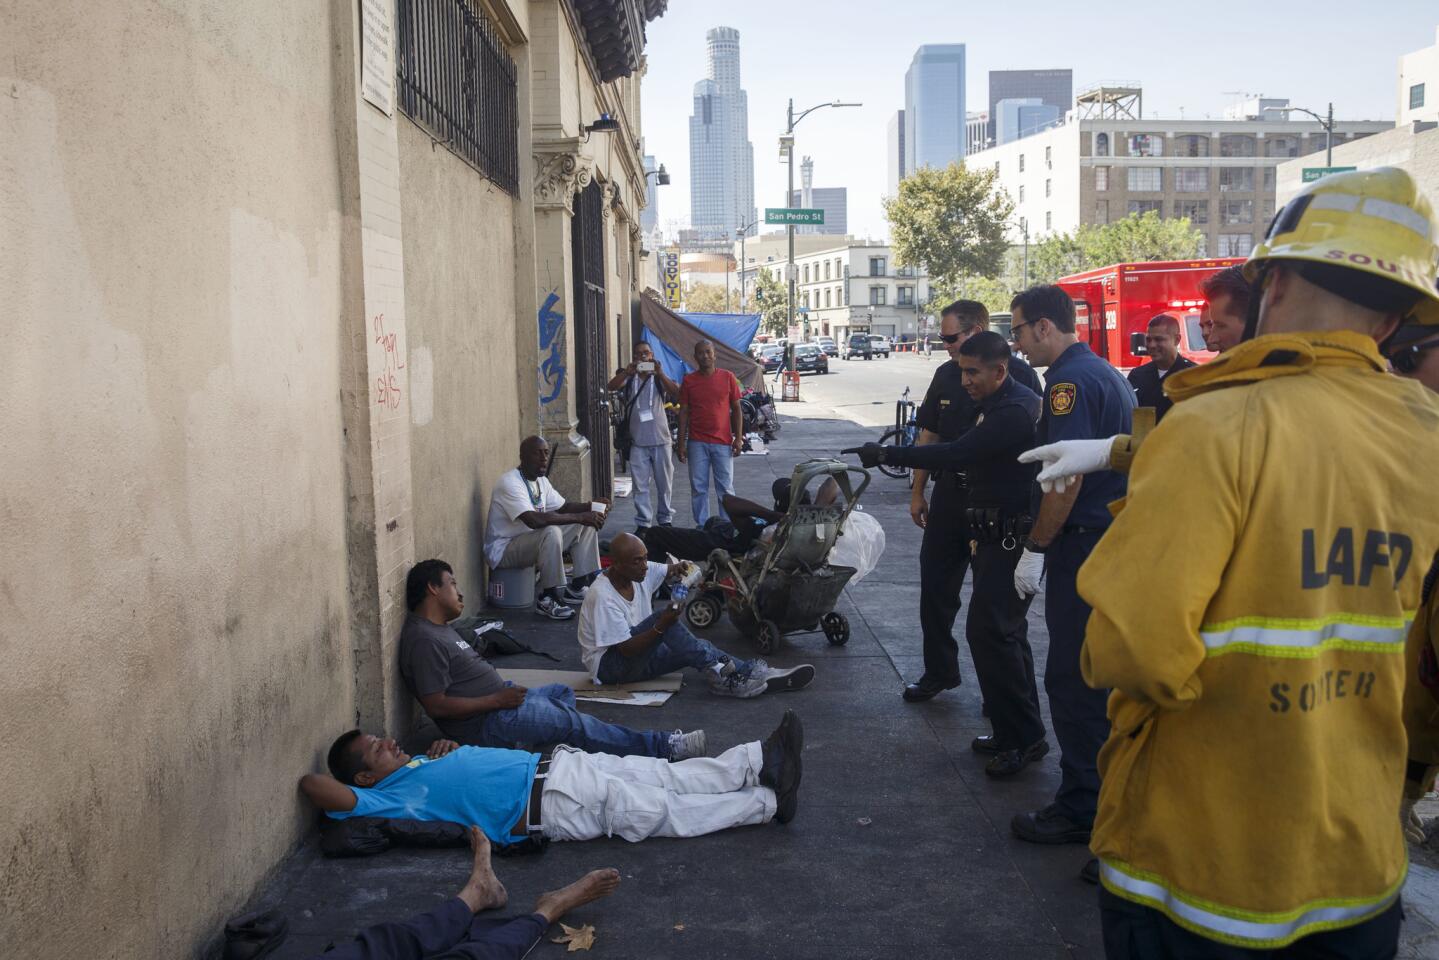 Paramedics and police officers respond to Los Angeles' skid row, where multiple people fell ill on Friday, Aug. 19, 2016.